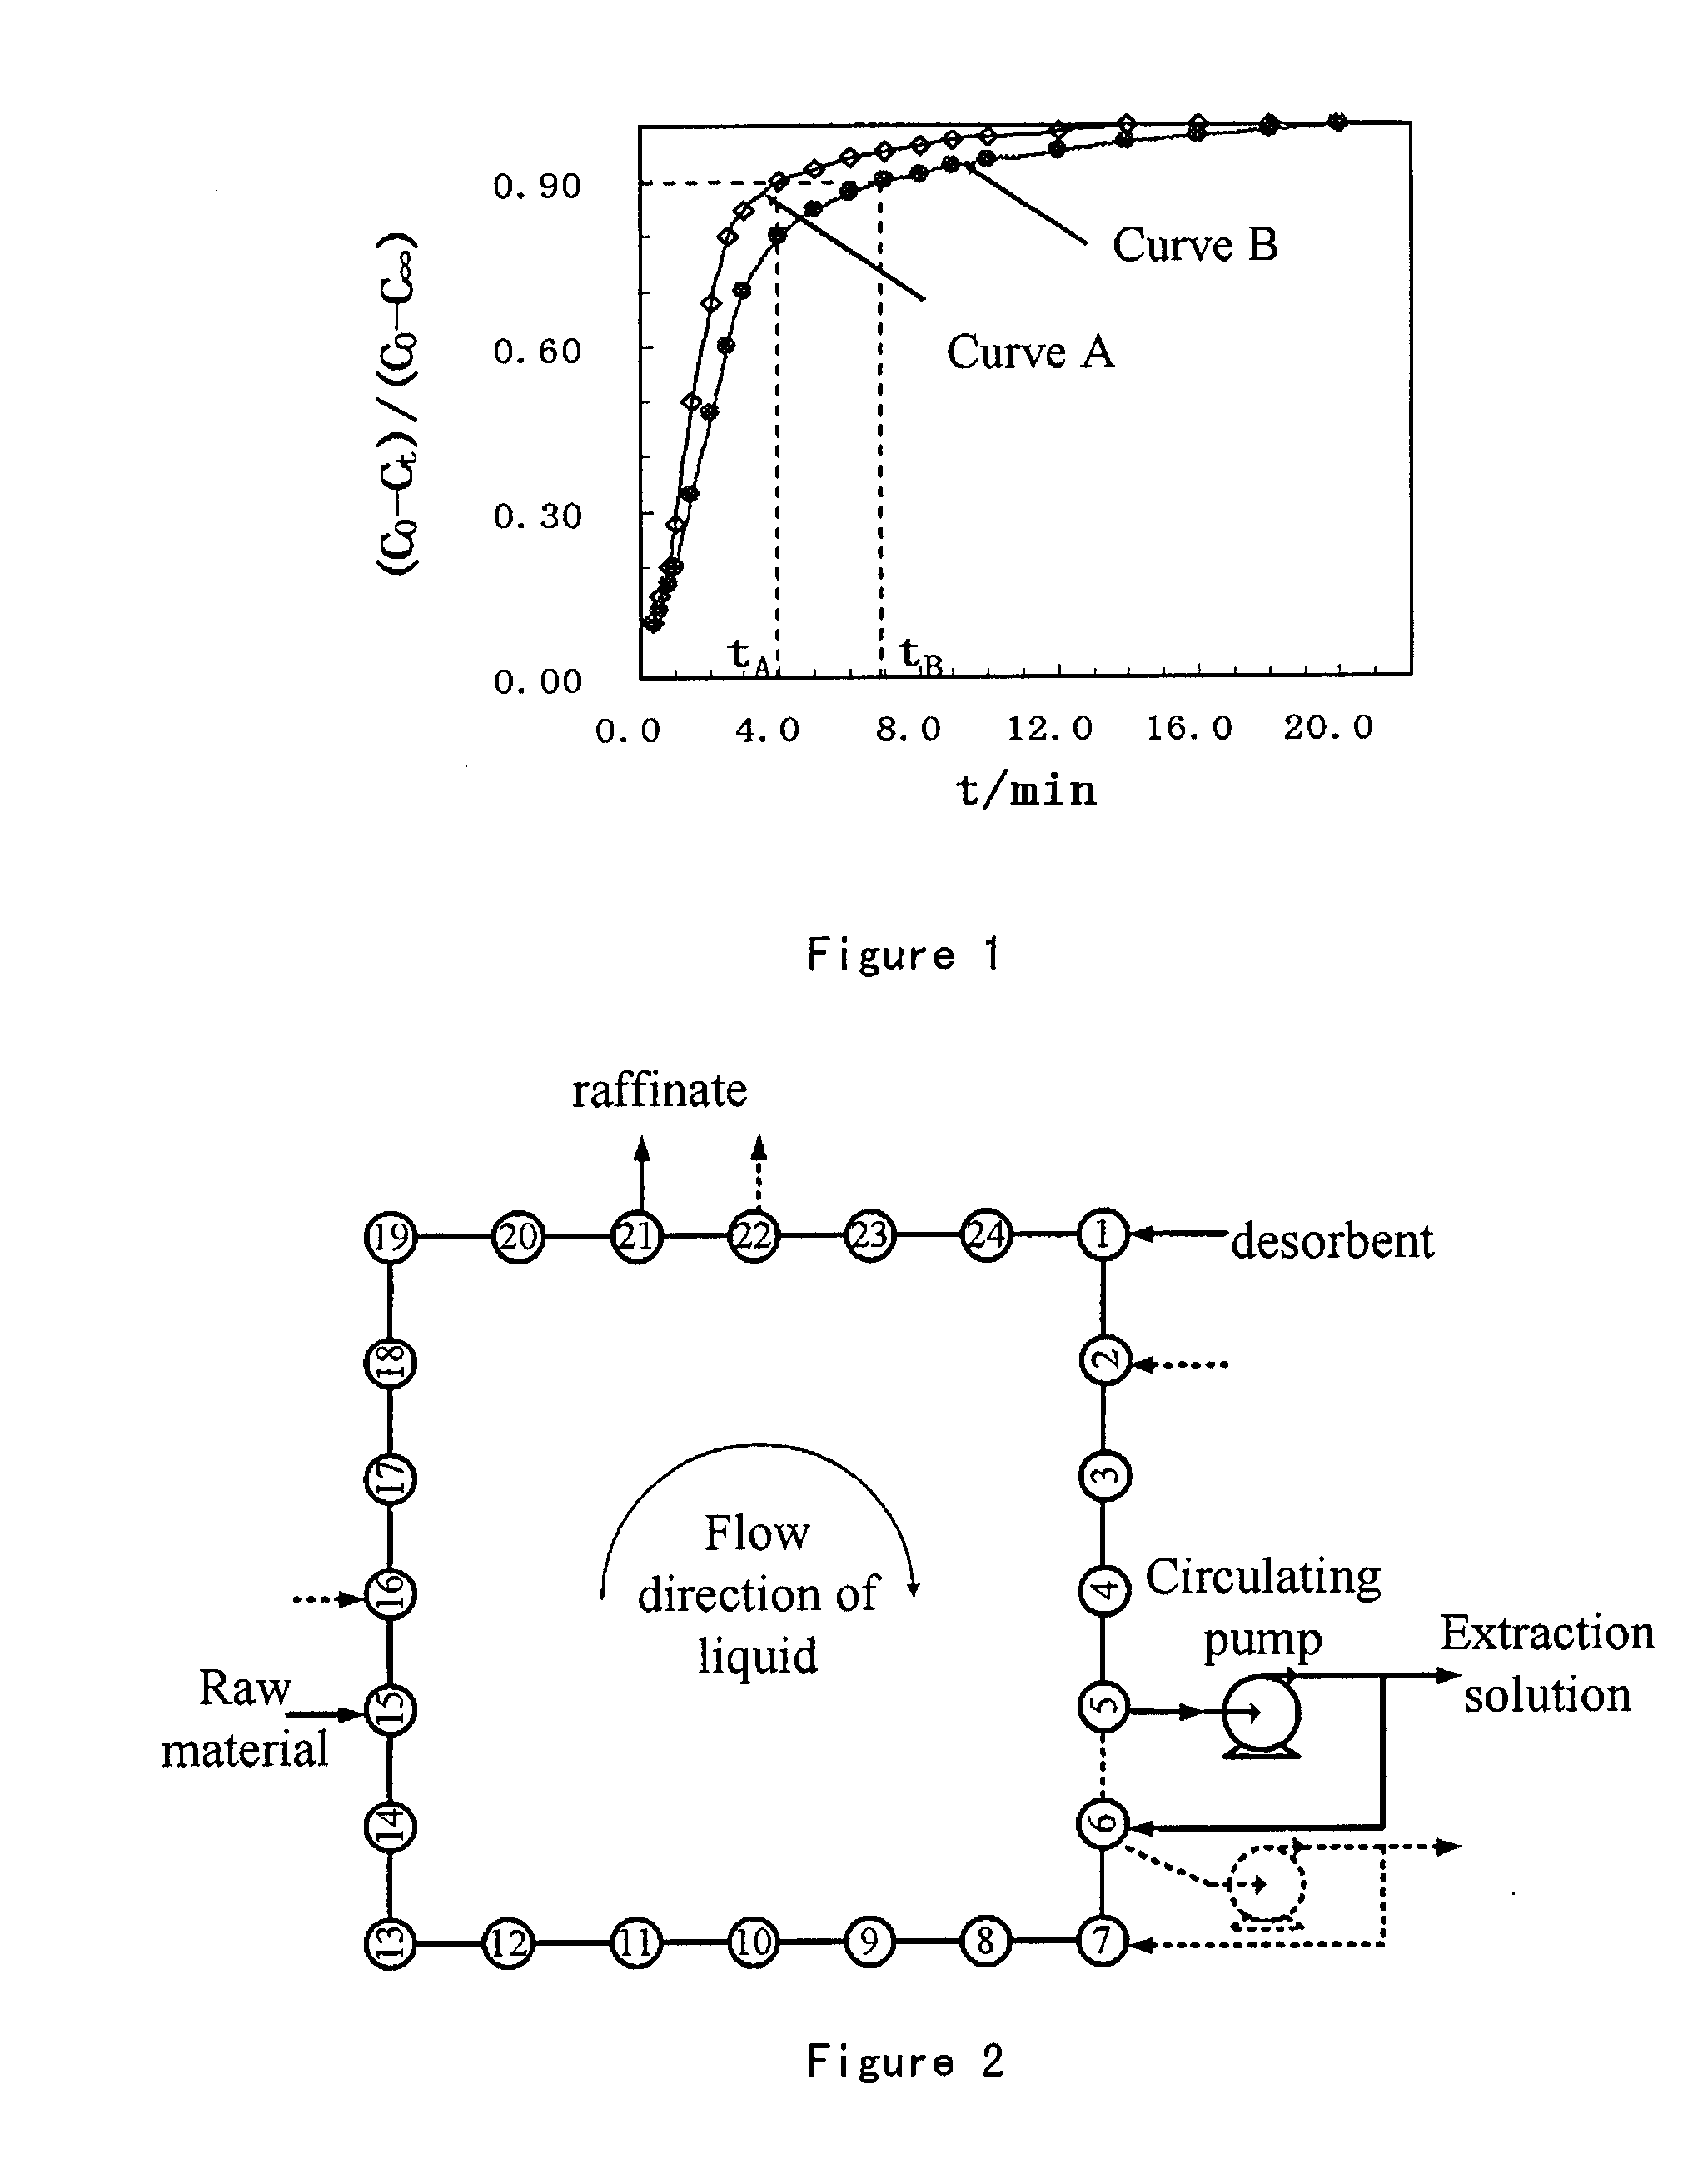 Agglomerated zeolite adsorbents and process for producing the same